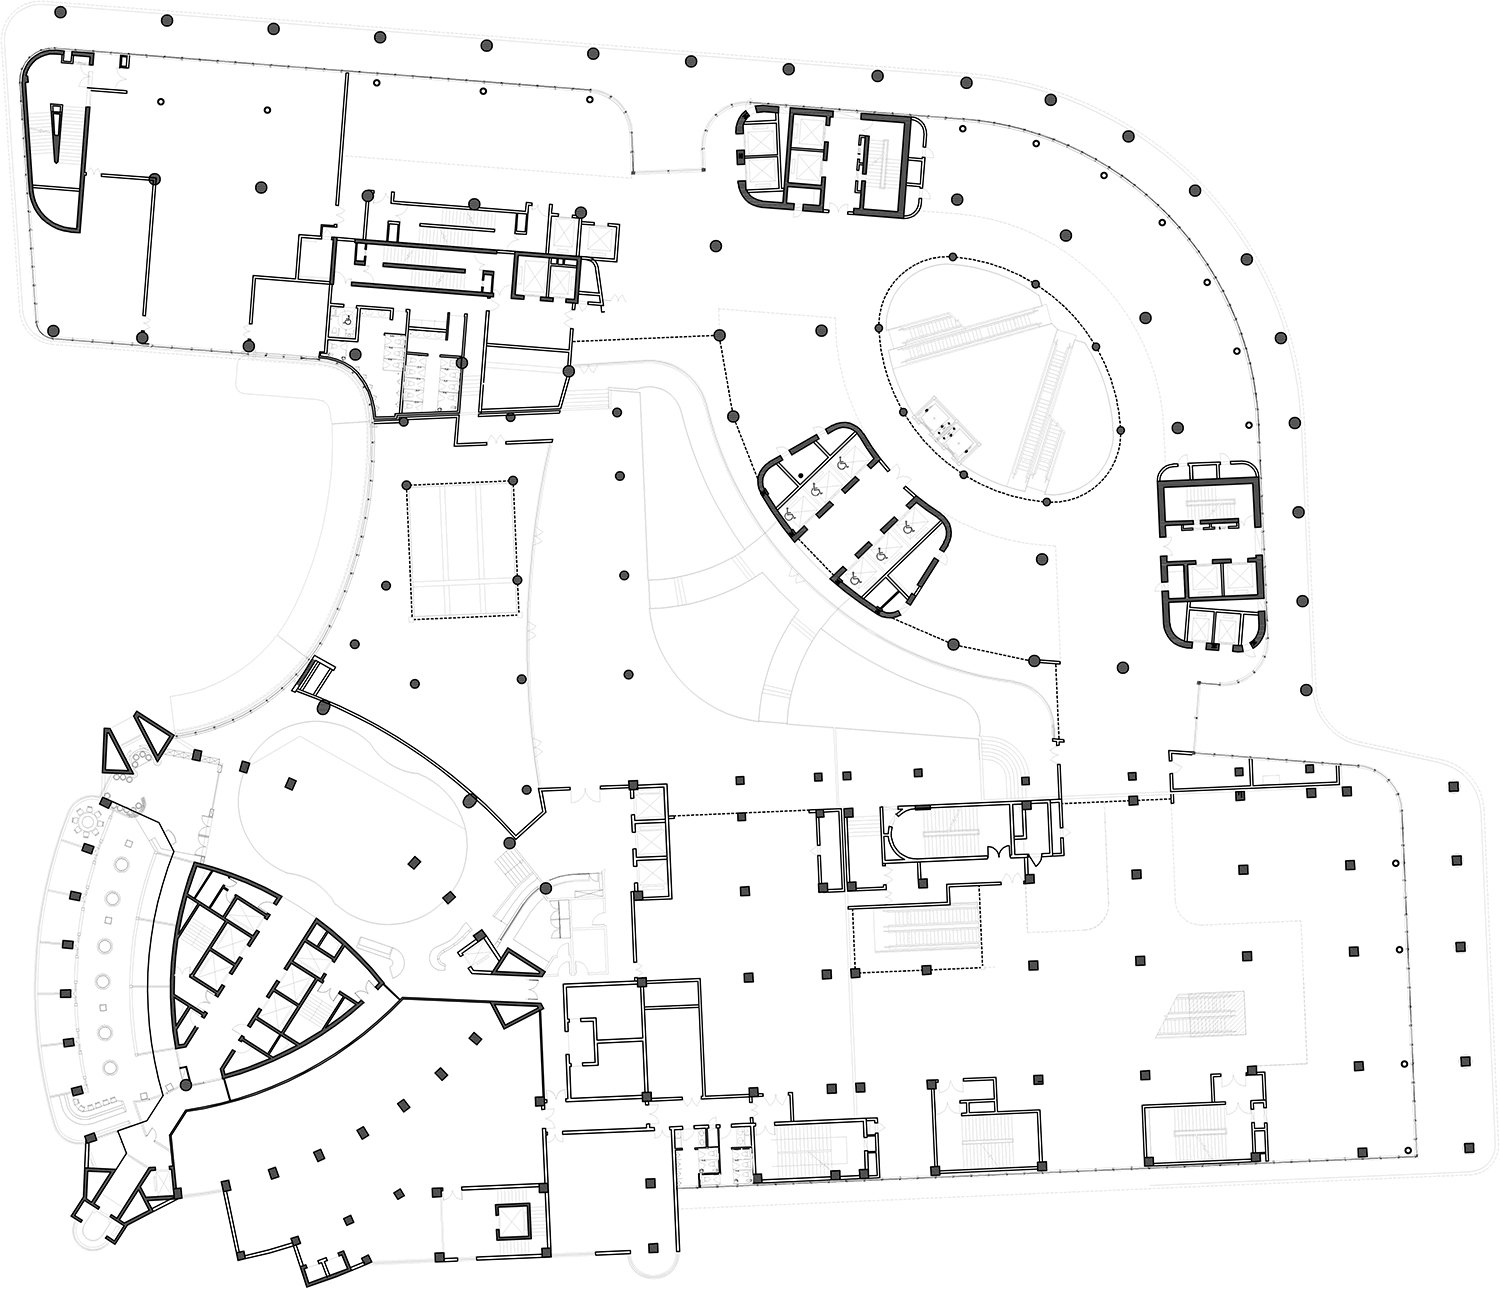 Second Floor Plan | The Architectural Design & Research Institute of Zhejiang University; Architects von Gerkan, Marg and Partners (gmp)